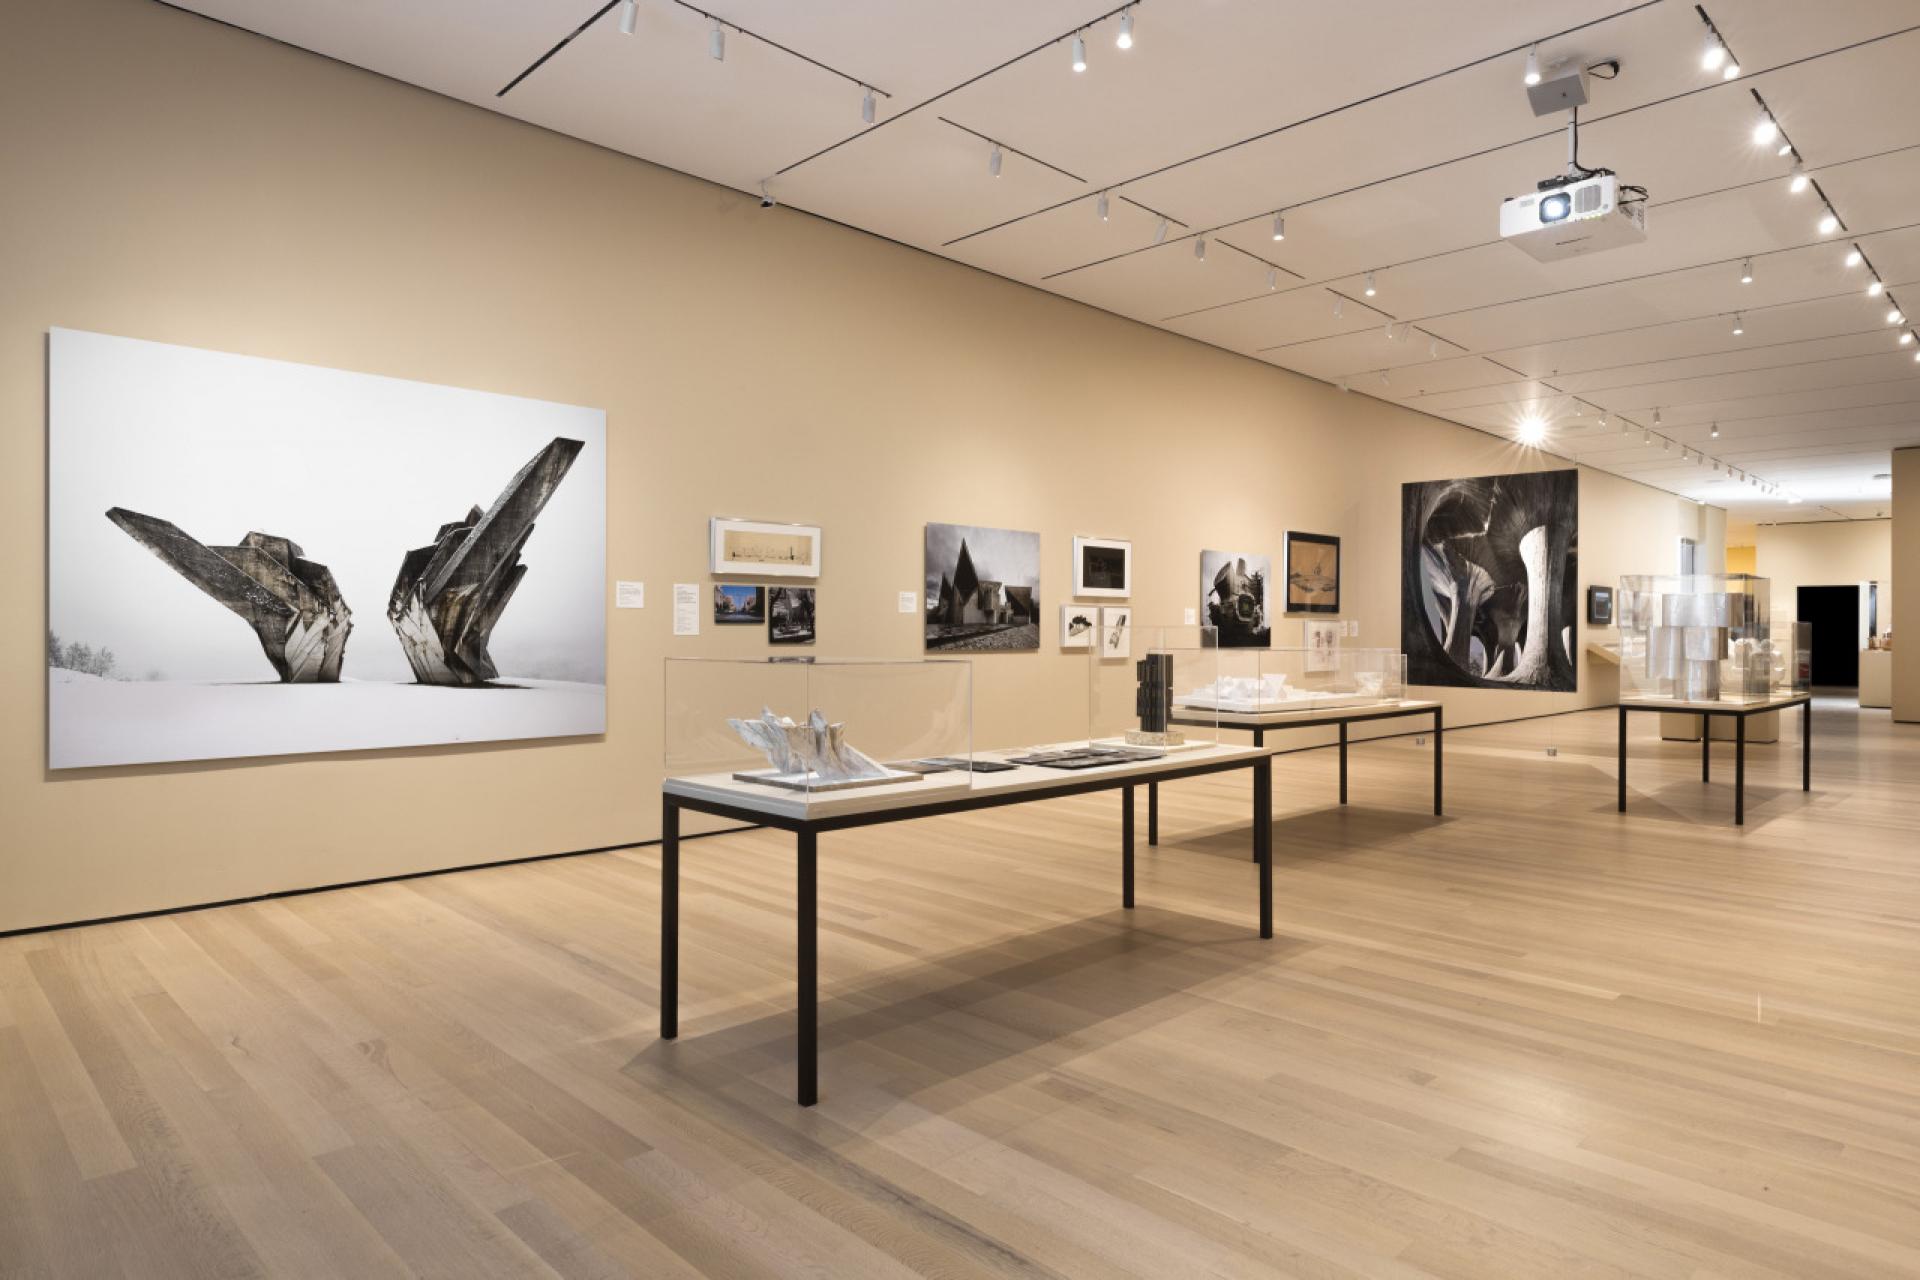 Installation view of Toward a Concrete Utopia: Architecture in Yugoslavia, 1948–1980, The Museum of Modern Art, New York, July 15, 2018–January 13, 2019. | Photo by © Martin Beck, The Museum of Modern Art, 2018